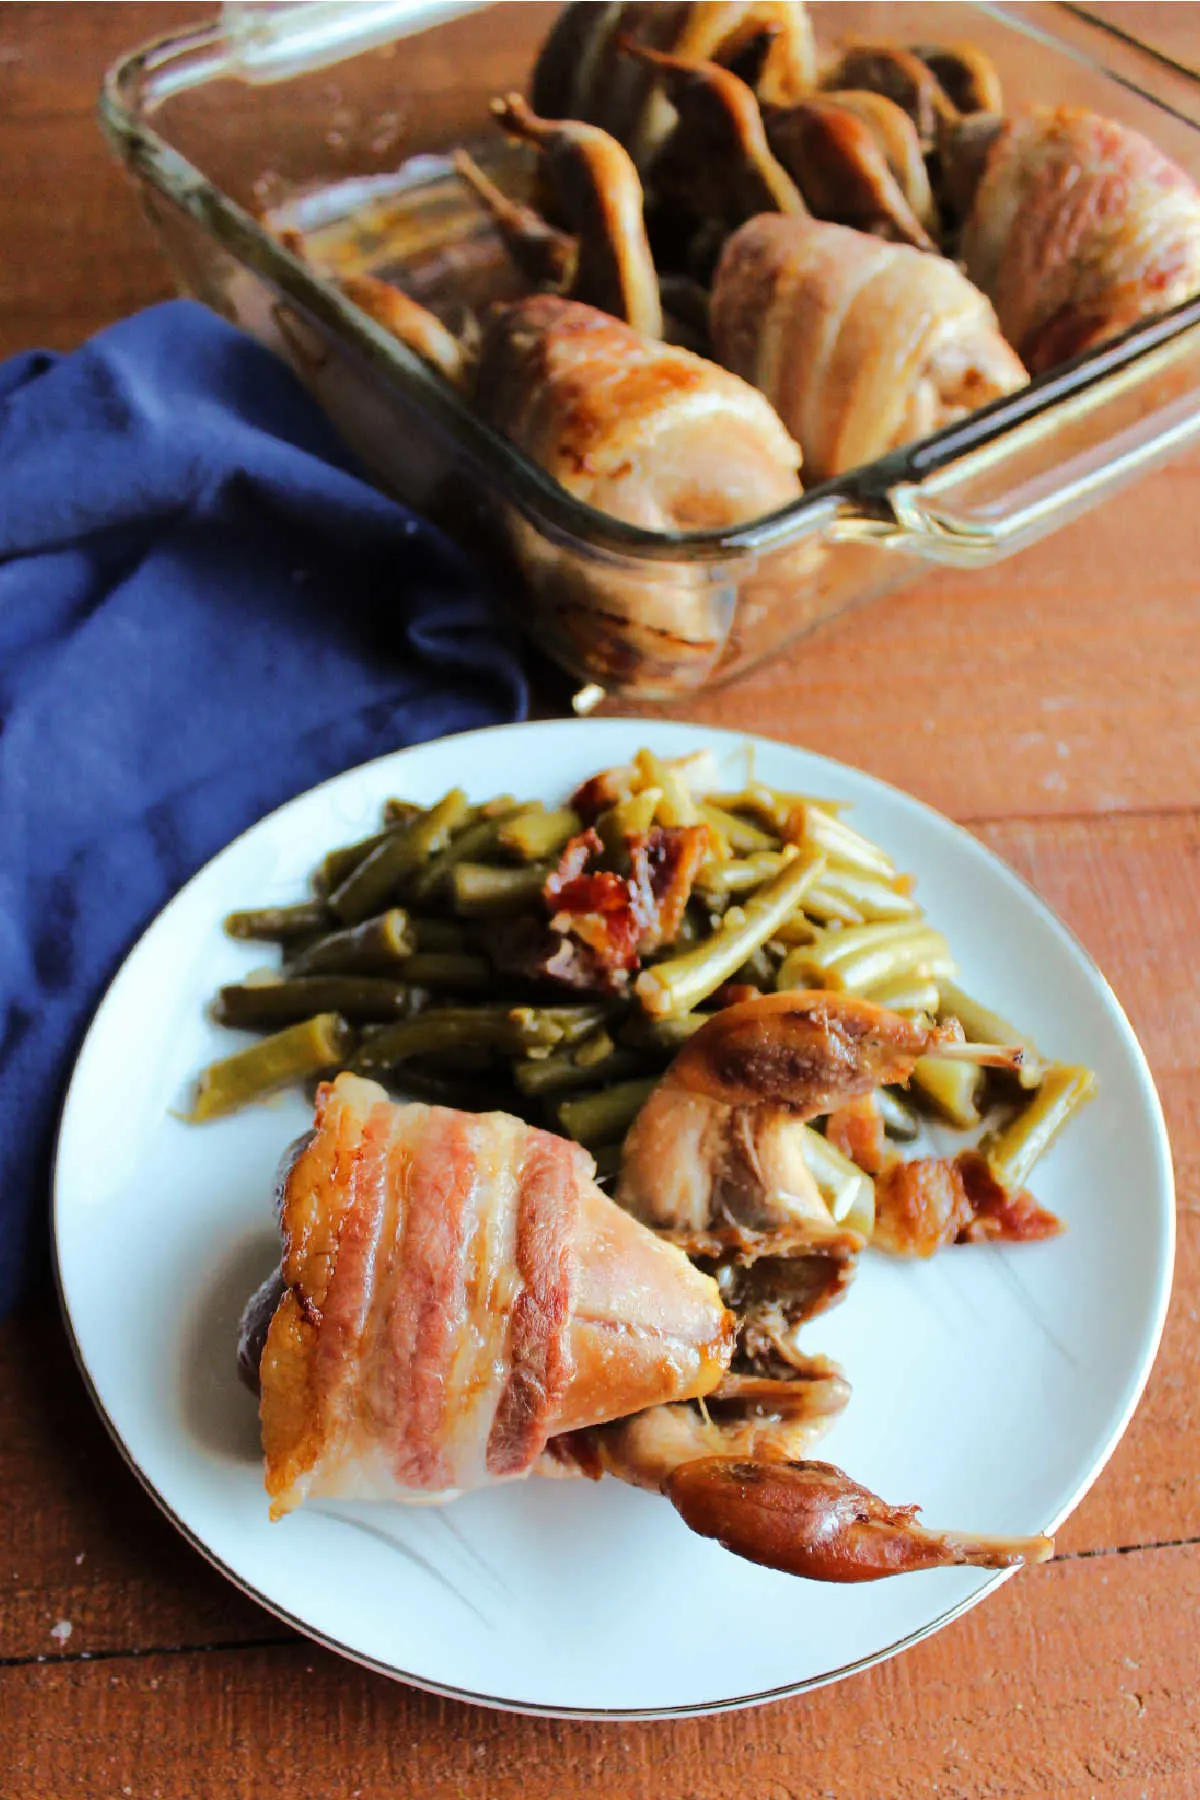 Quail and green beans on plate with pan full of quail in background.